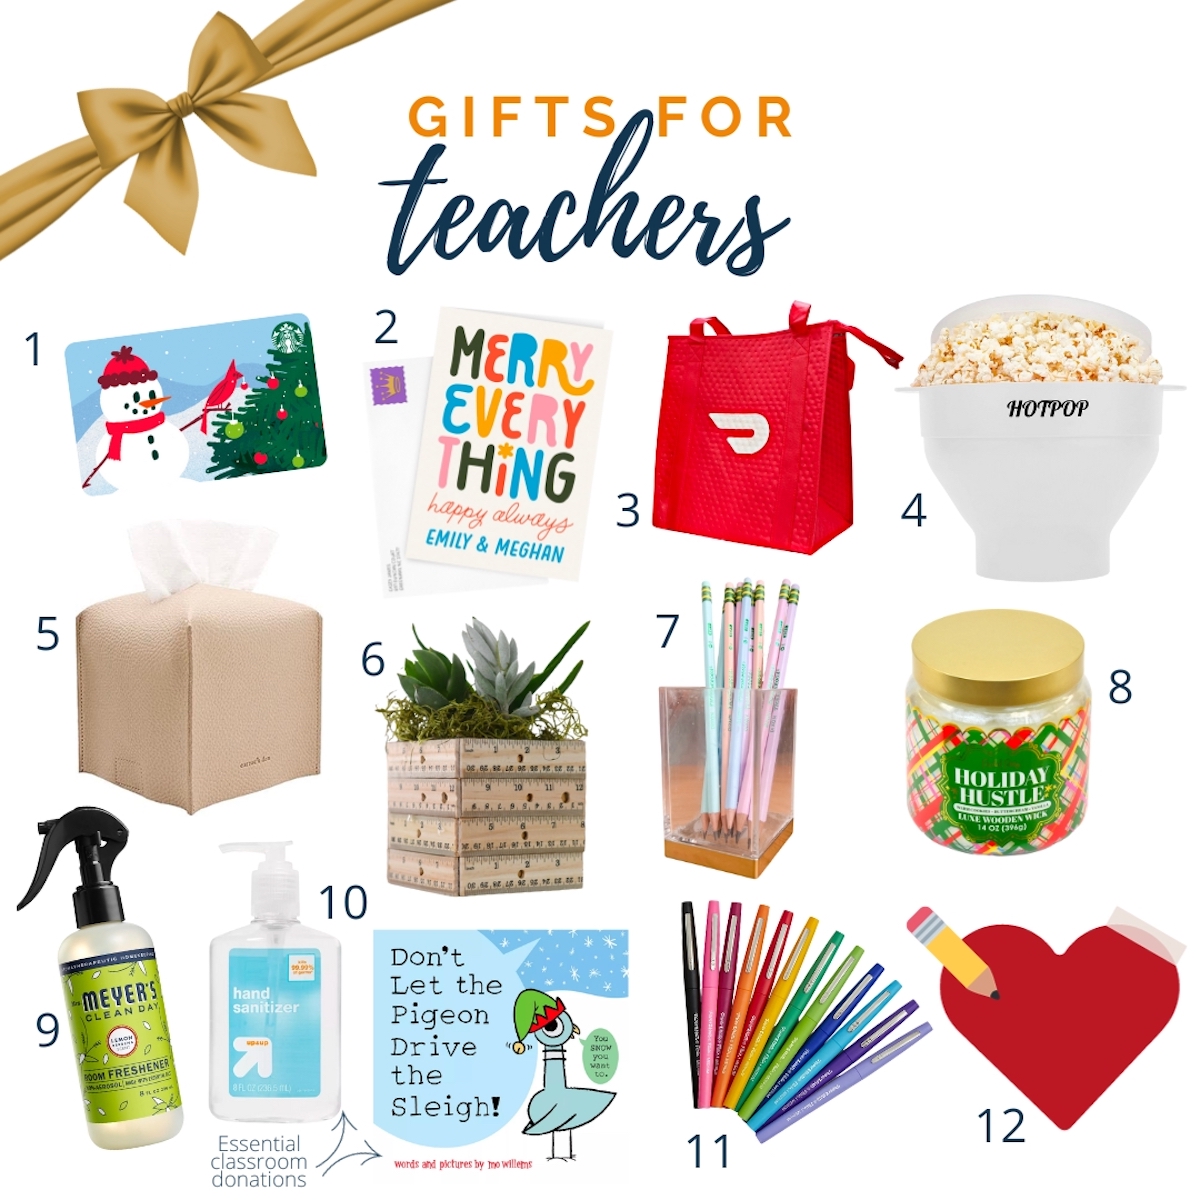 5 Best Gifts for Teachers | AdoptAClassroom.org